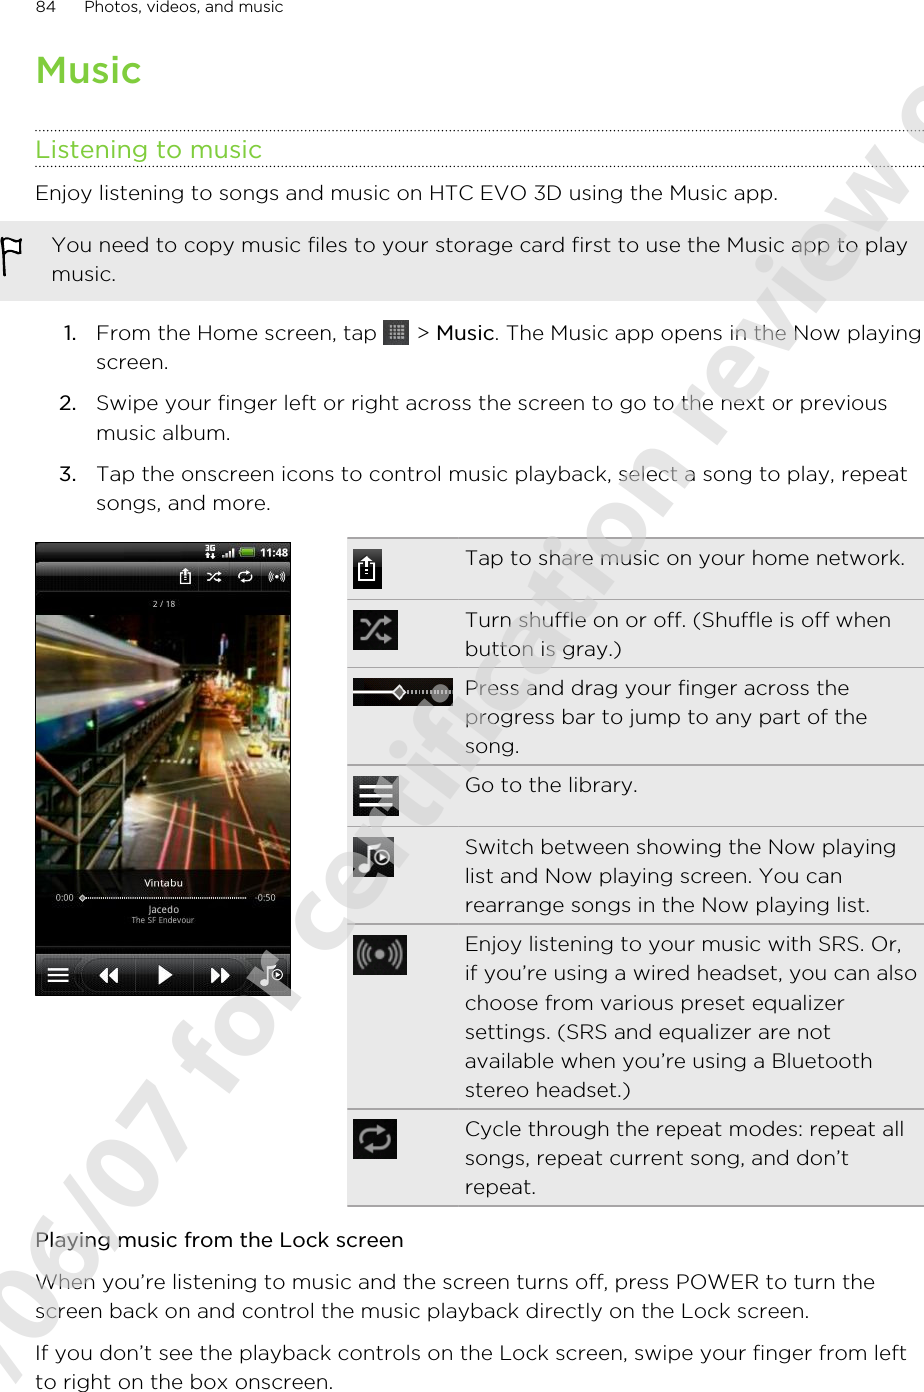 MusicListening to musicEnjoy listening to songs and music on HTC EVO 3D using the Music app.You need to copy music files to your storage card first to use the Music app to playmusic.1. From the Home screen, tap   &gt; Music. The Music app opens in the Now playingscreen.2. Swipe your finger left or right across the screen to go to the next or previousmusic album.3. Tap the onscreen icons to control music playback, select a song to play, repeatsongs, and more.Tap to share music on your home network.Turn shuffle on or off. (Shuffle is off whenbutton is gray.)Press and drag your finger across theprogress bar to jump to any part of thesong.Go to the library.Switch between showing the Now playinglist and Now playing screen. You canrearrange songs in the Now playing list.Enjoy listening to your music with SRS. Or,if you’re using a wired headset, you can alsochoose from various preset equalizersettings. (SRS and equalizer are notavailable when you’re using a Bluetoothstereo headset.)Cycle through the repeat modes: repeat allsongs, repeat current song, and don’trepeat.Playing music from the Lock screenWhen you’re listening to music and the screen turns off, press POWER to turn thescreen back on and control the music playback directly on the Lock screen.If you don’t see the playback controls on the Lock screen, swipe your finger from leftto right on the box onscreen.84 Photos, videos, and music2011/06/07 for certification review only